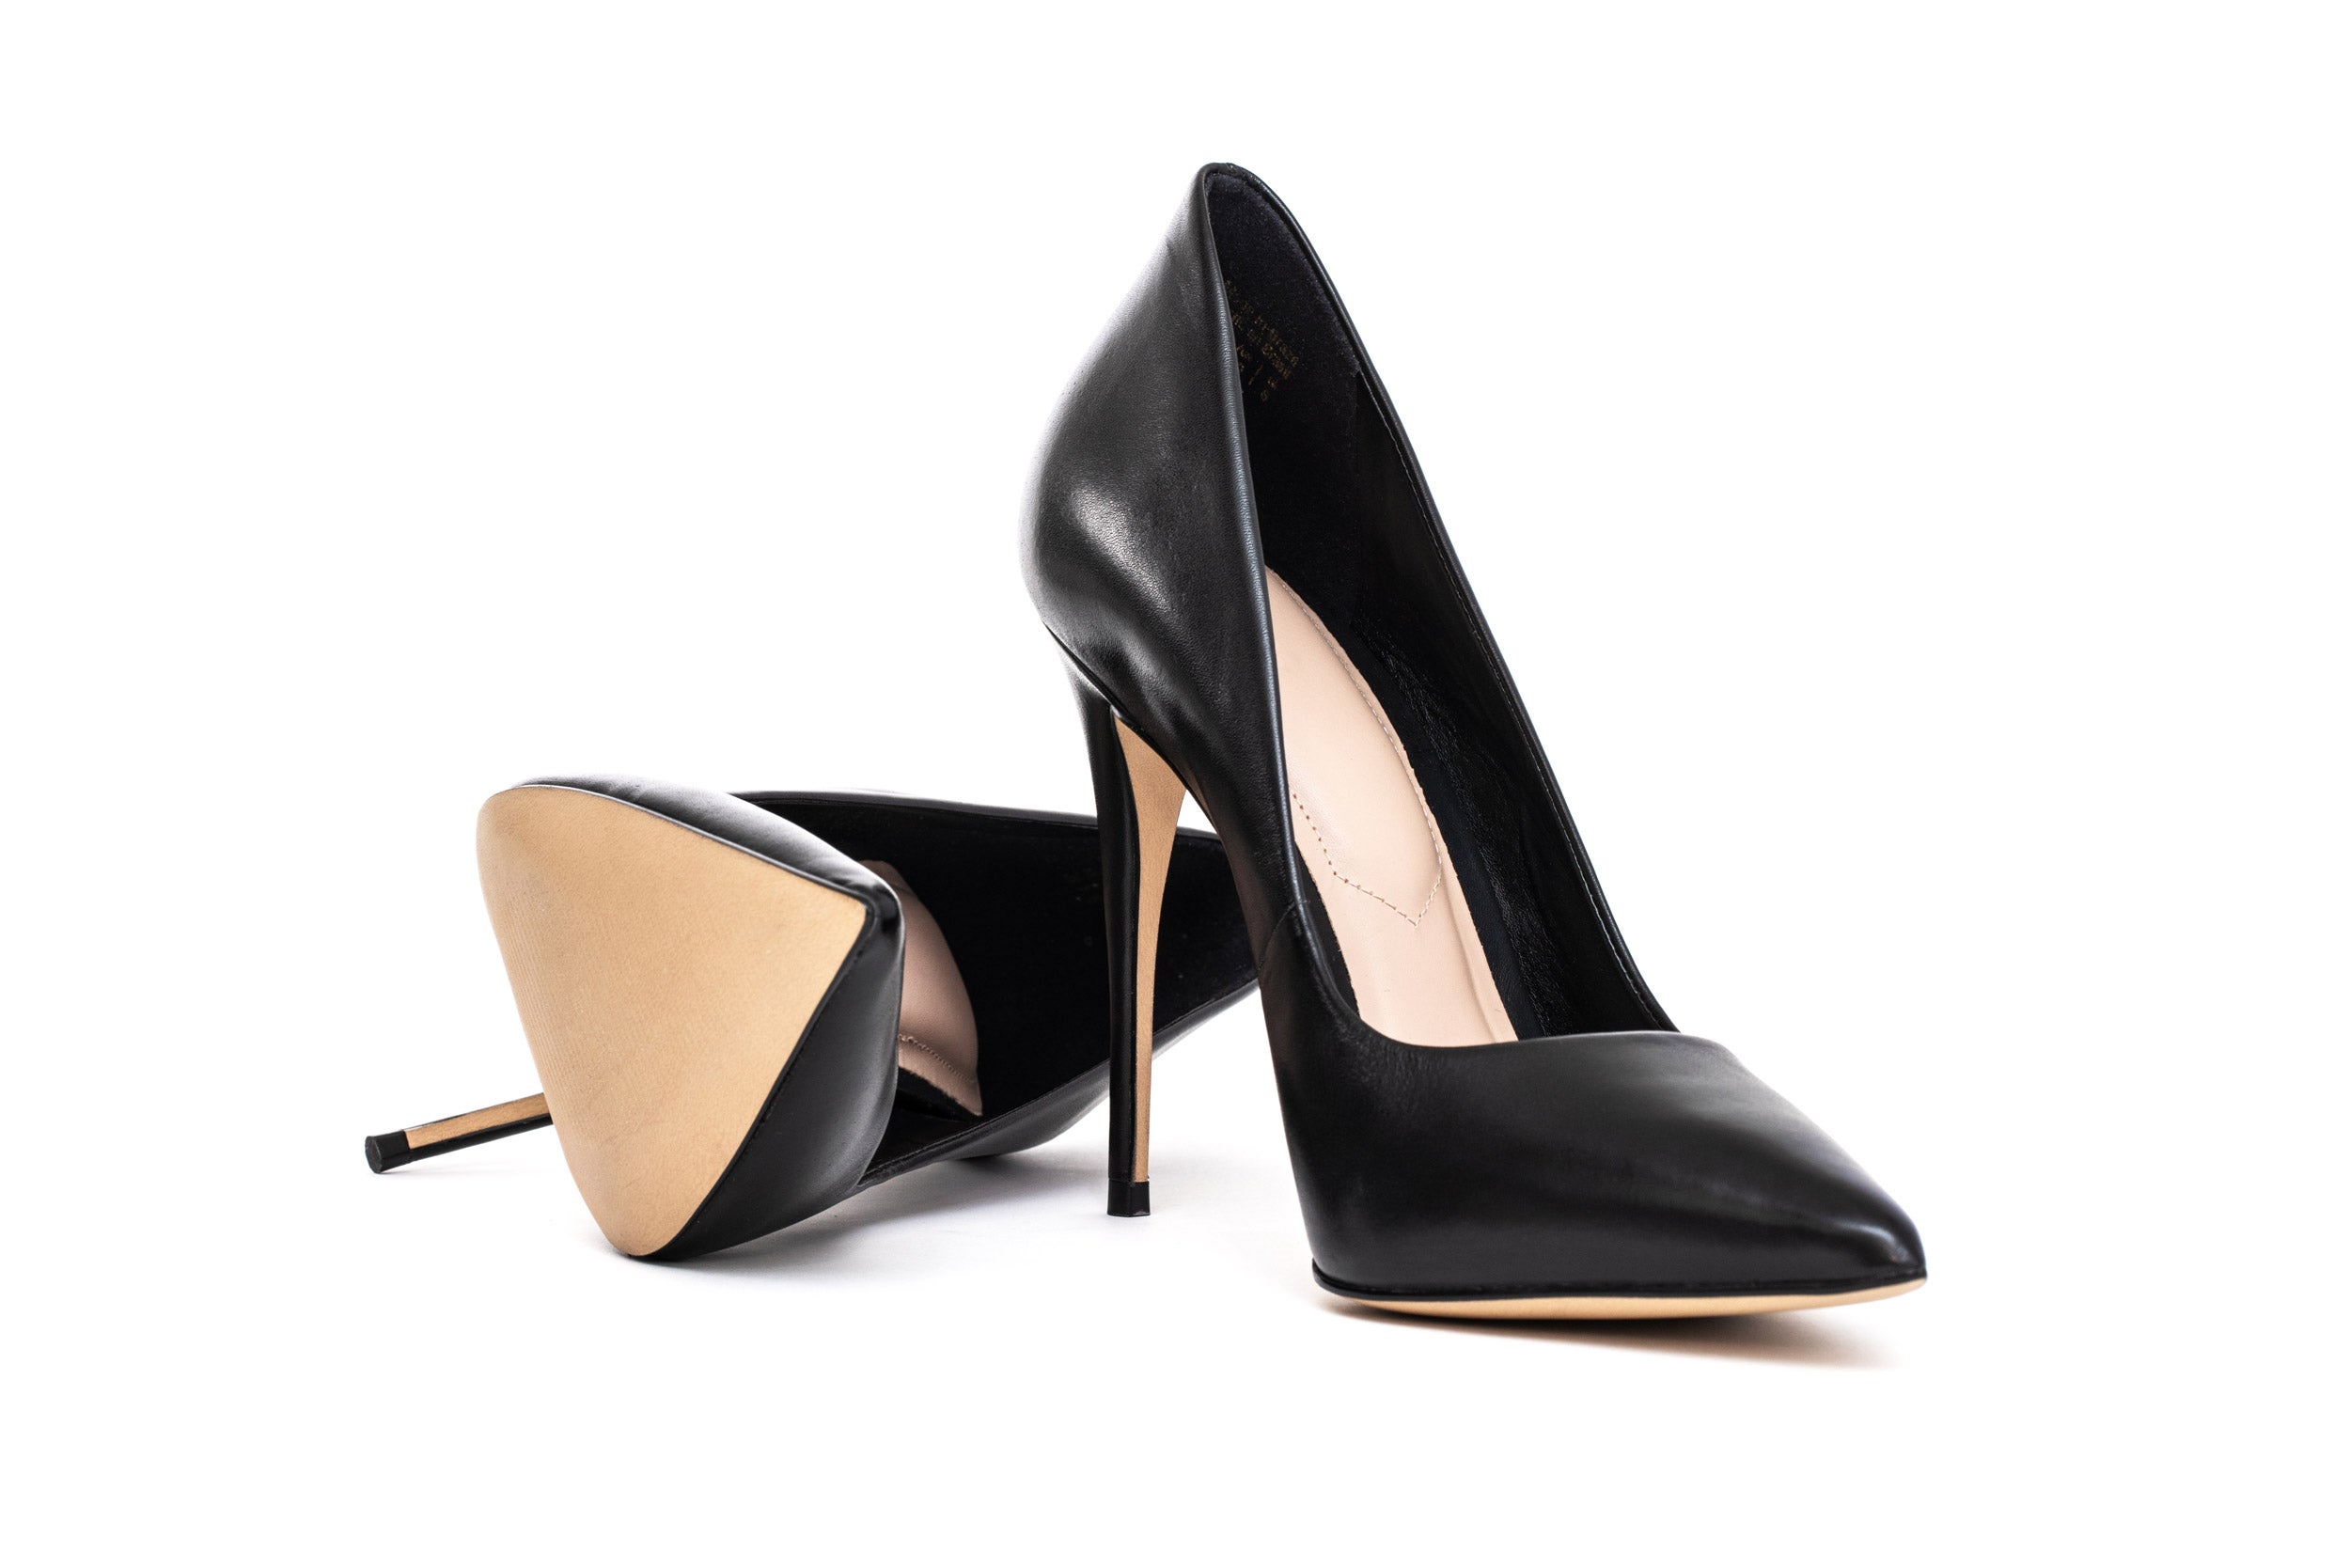 Harvard talk examines effects of high heels at work pic